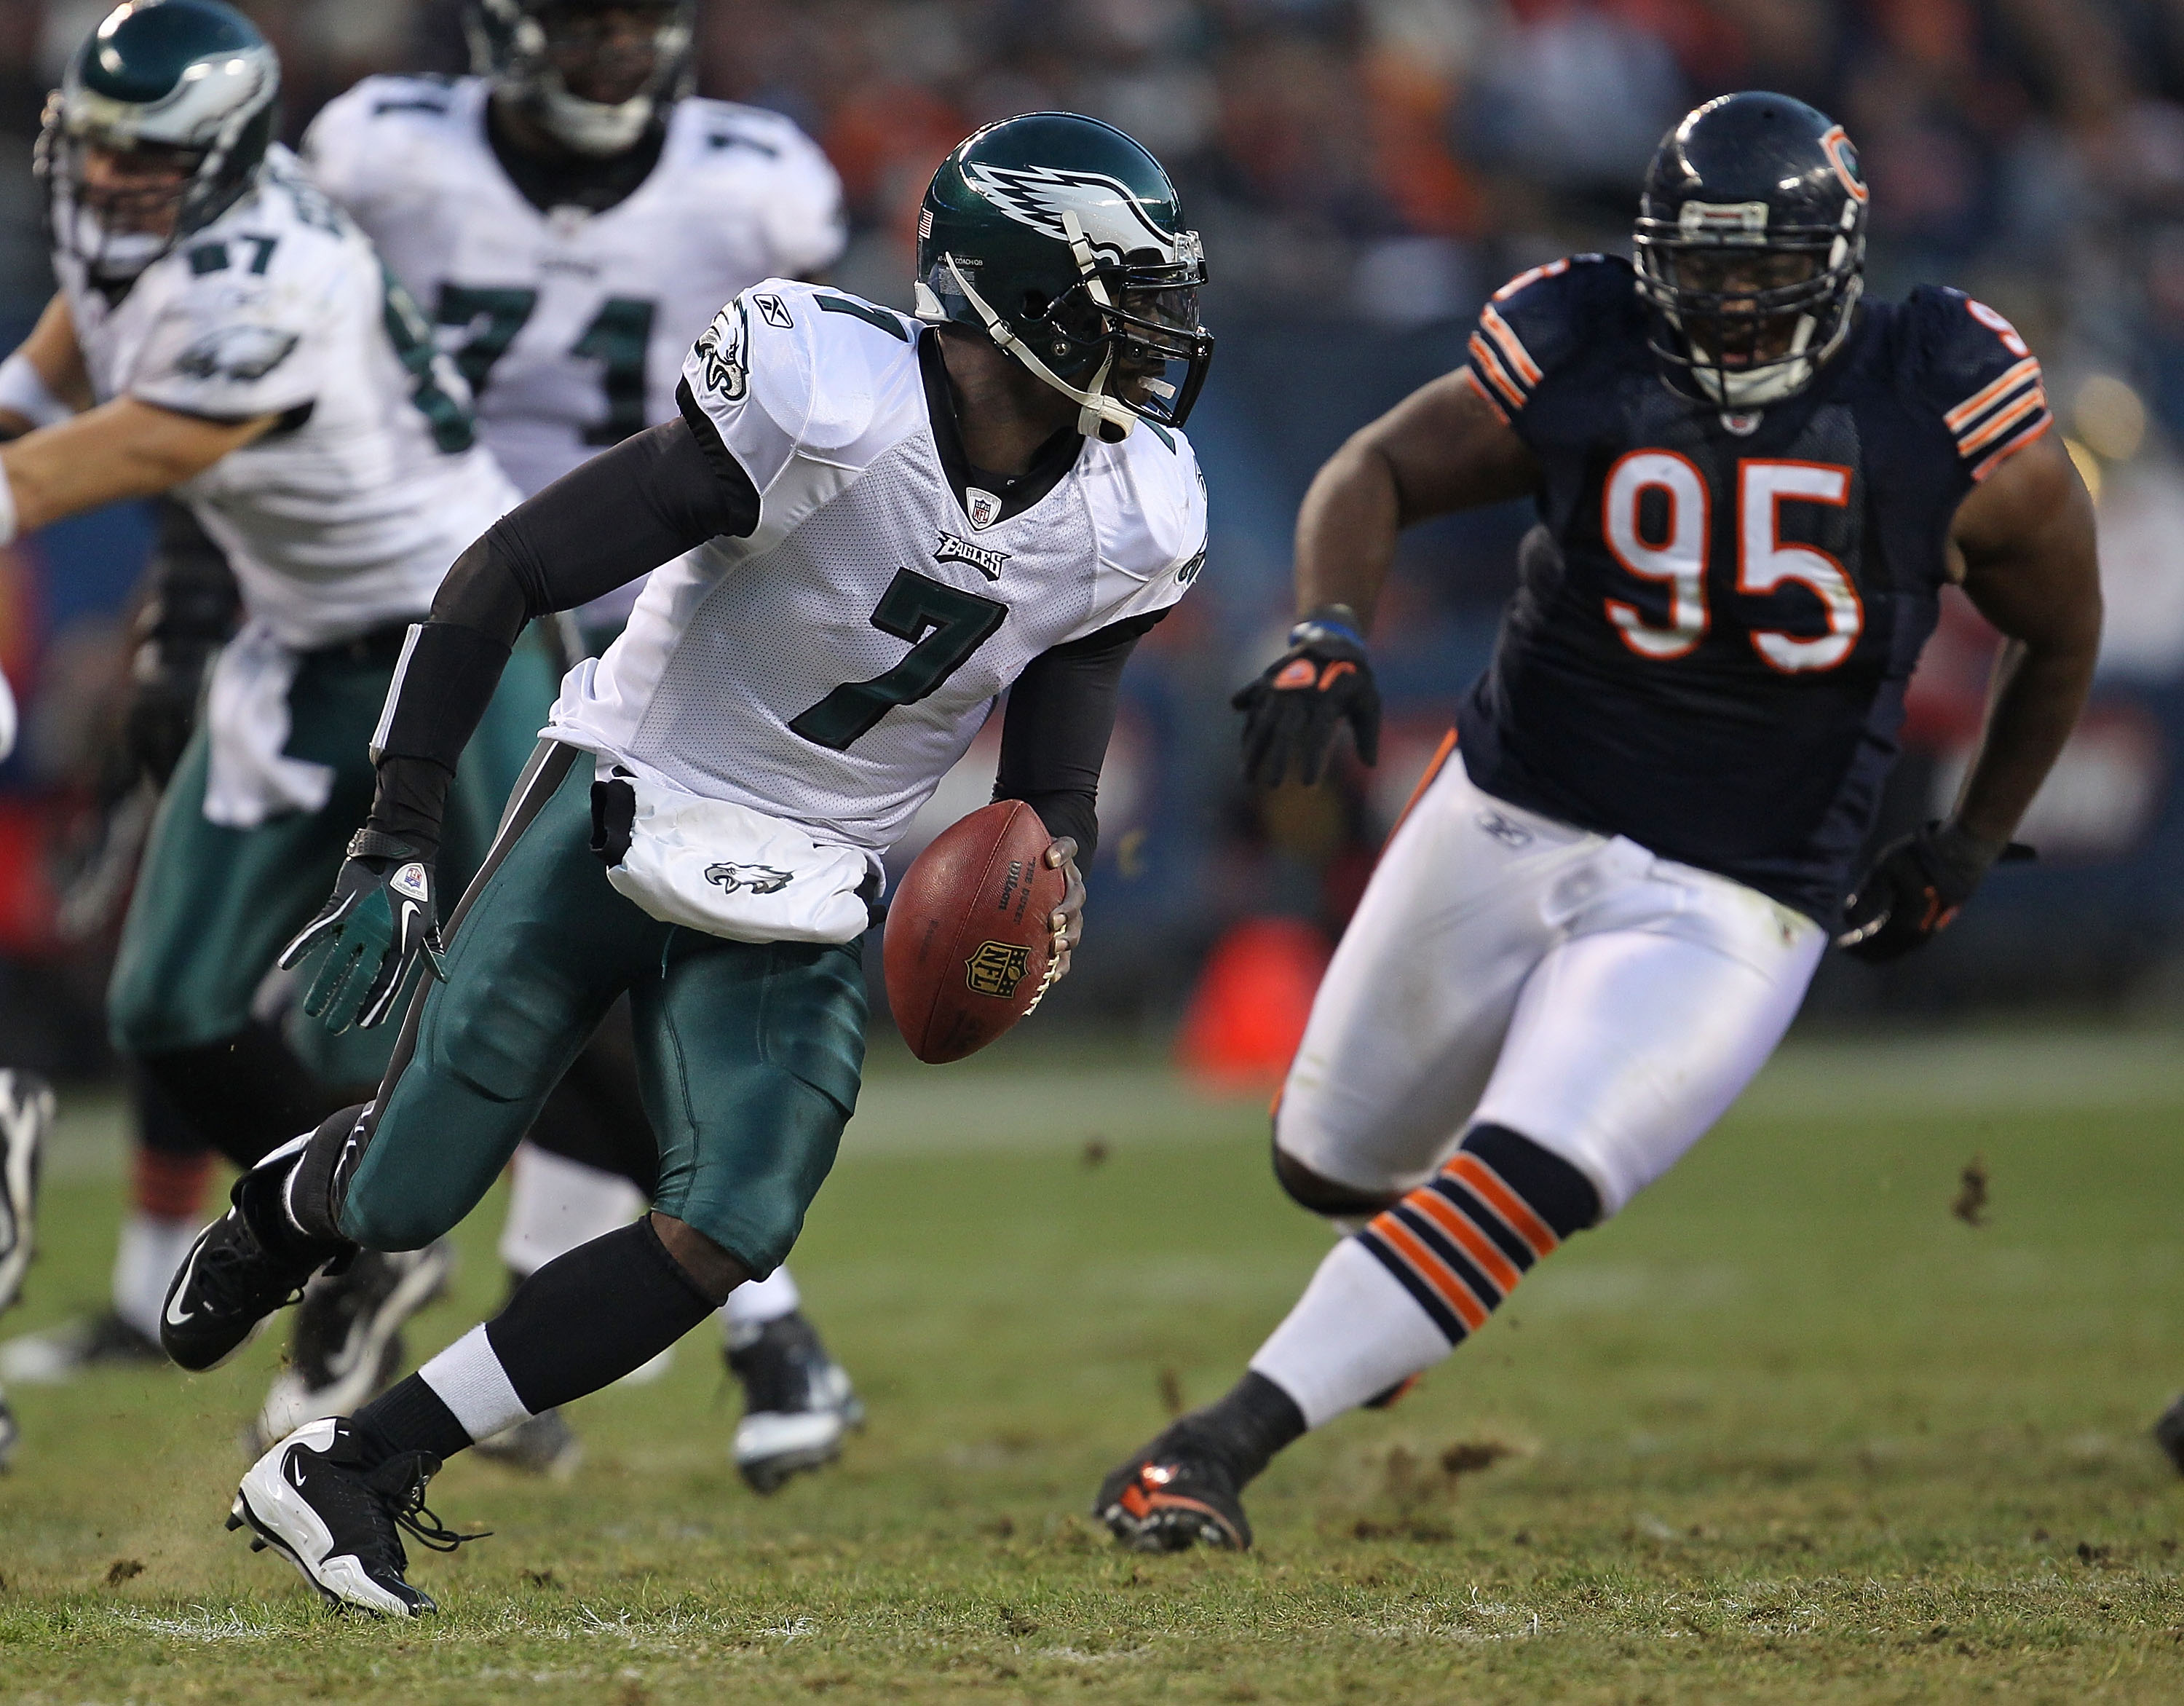 Maclin's big game spoiled by Eagles loss – The Morning Call